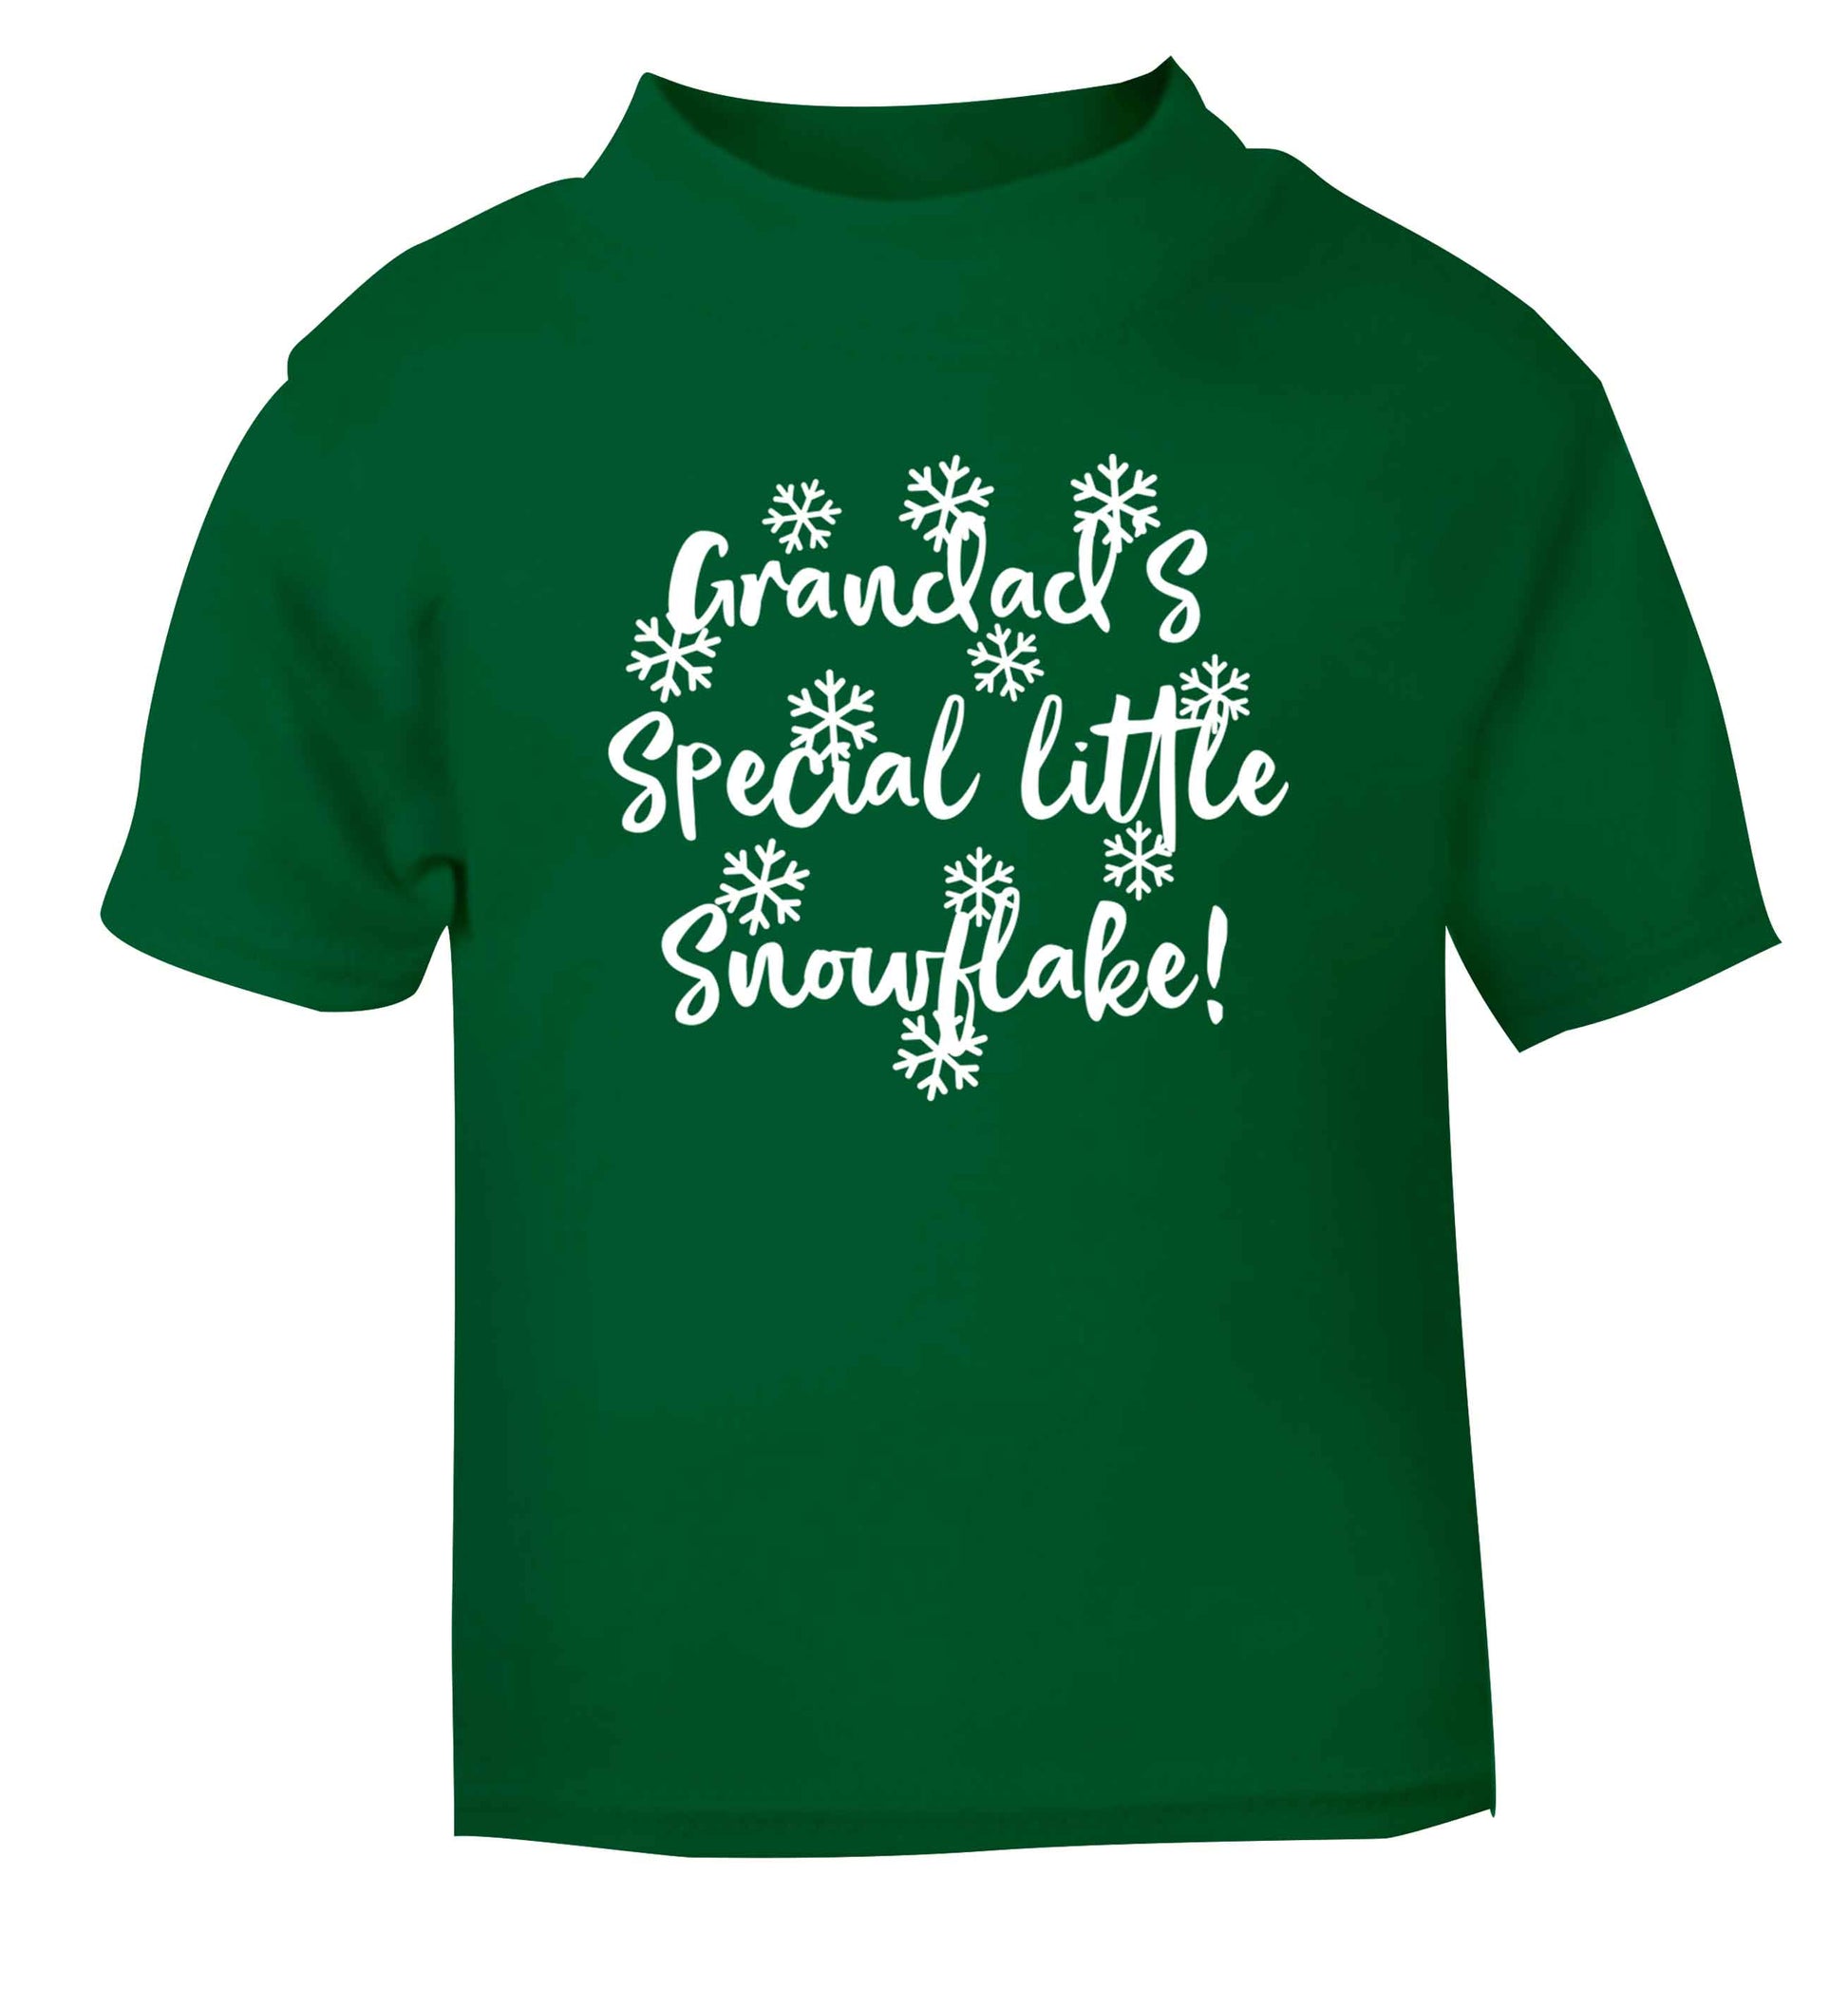 Grandad's special little snowflake green Baby Toddler Tshirt 2 Years